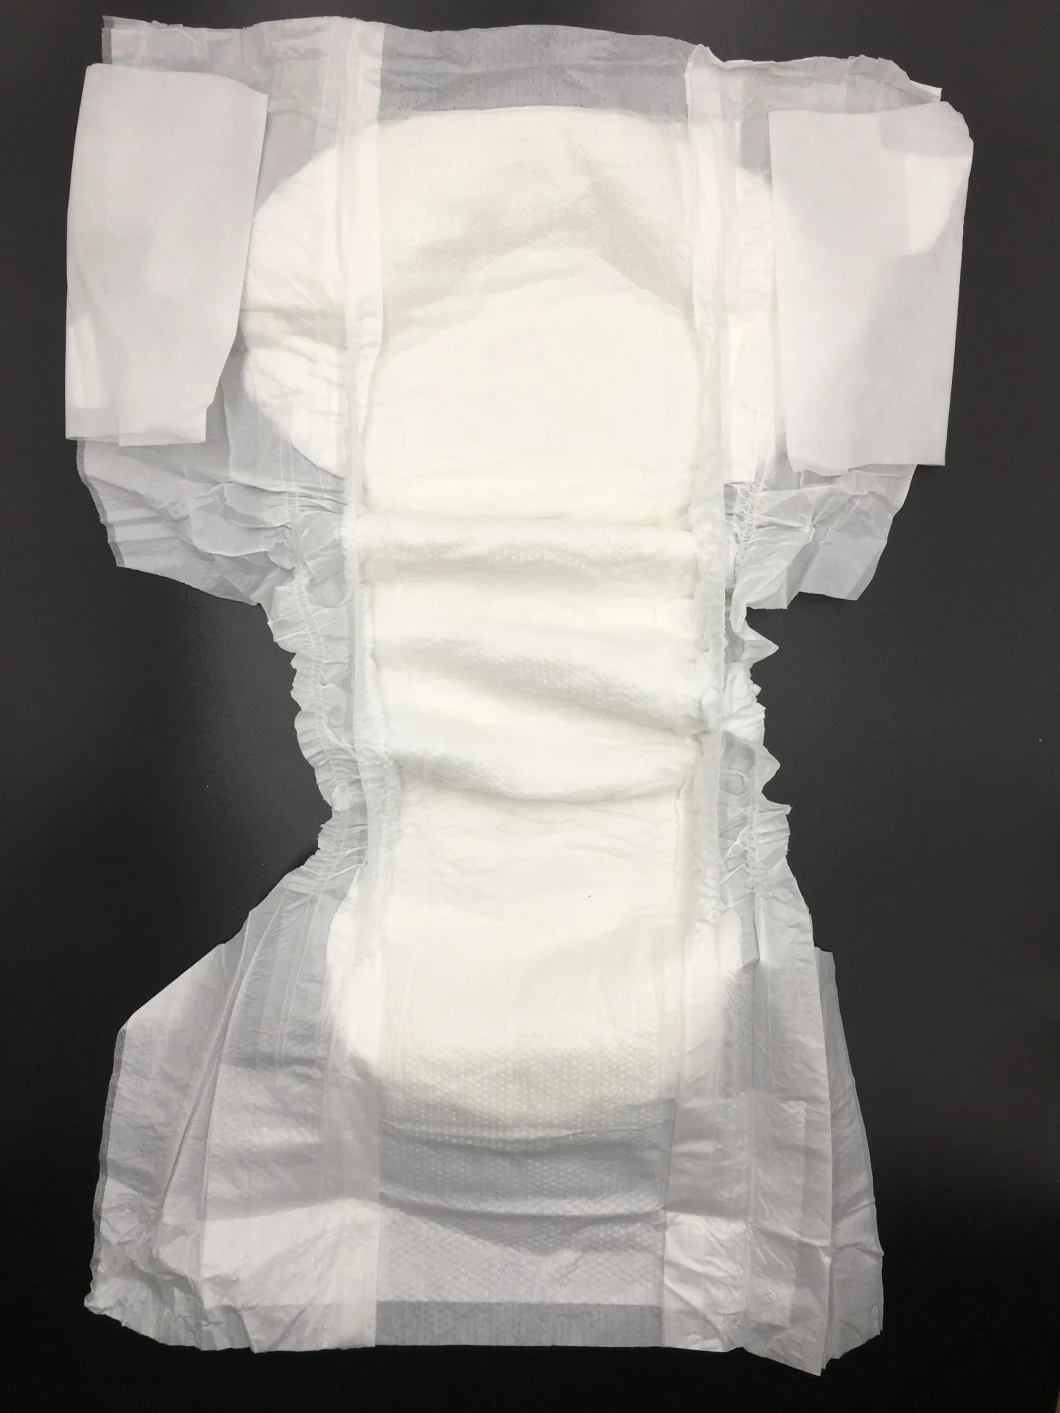 Superior Quality Cotton Disposable 3D Leak Guard Medical Hospital Adult Diaper for Elder and Incontinence